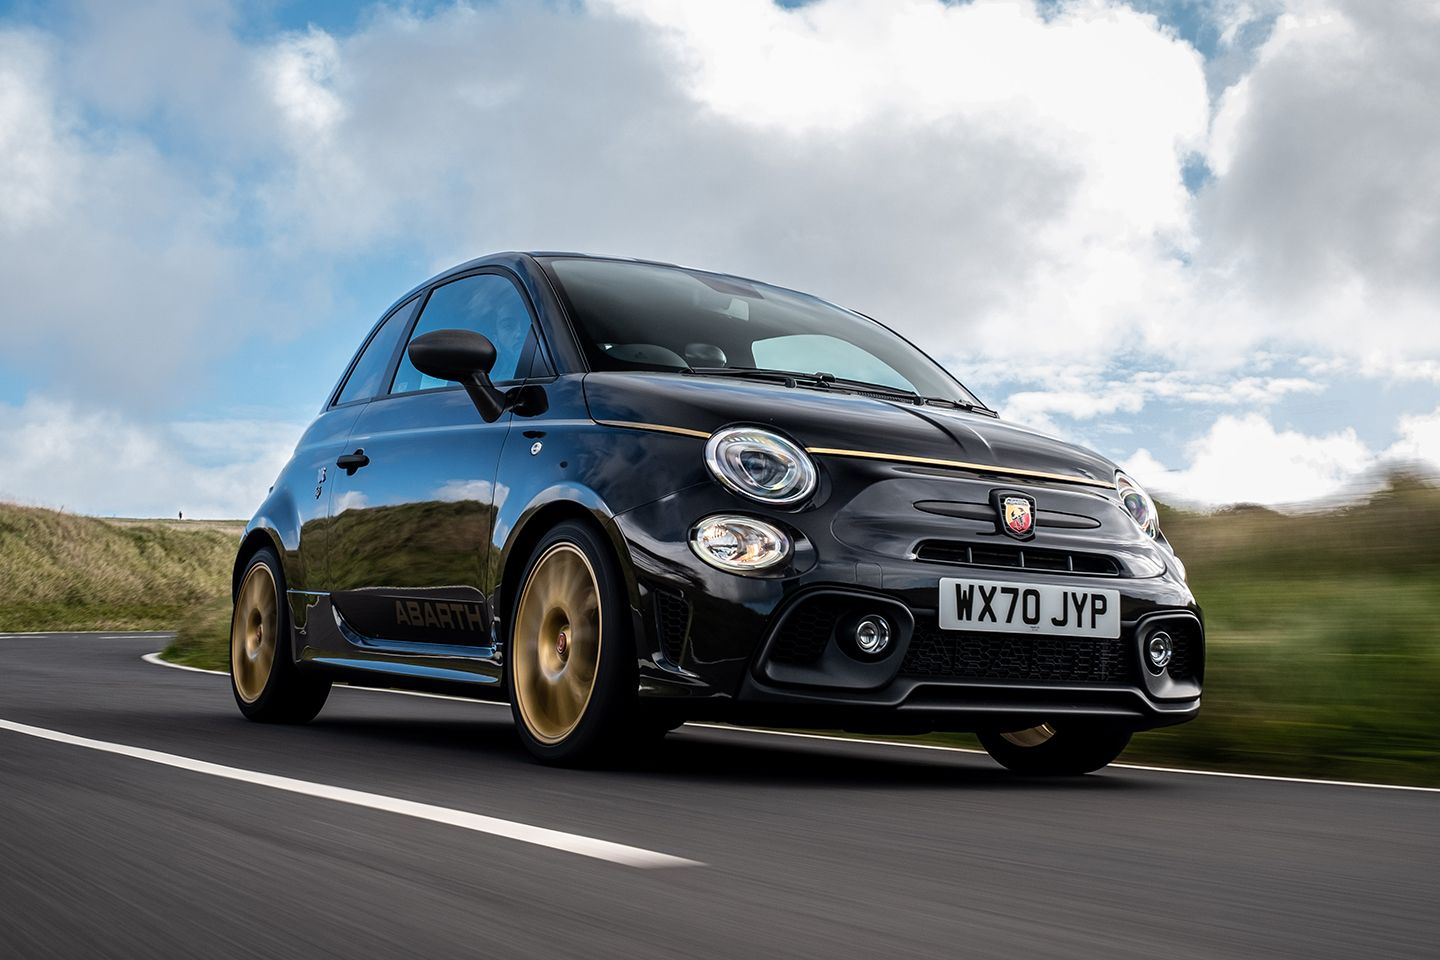 Fiat Buys the Punto Some More Time with New Jet Black 2 Edition for UK